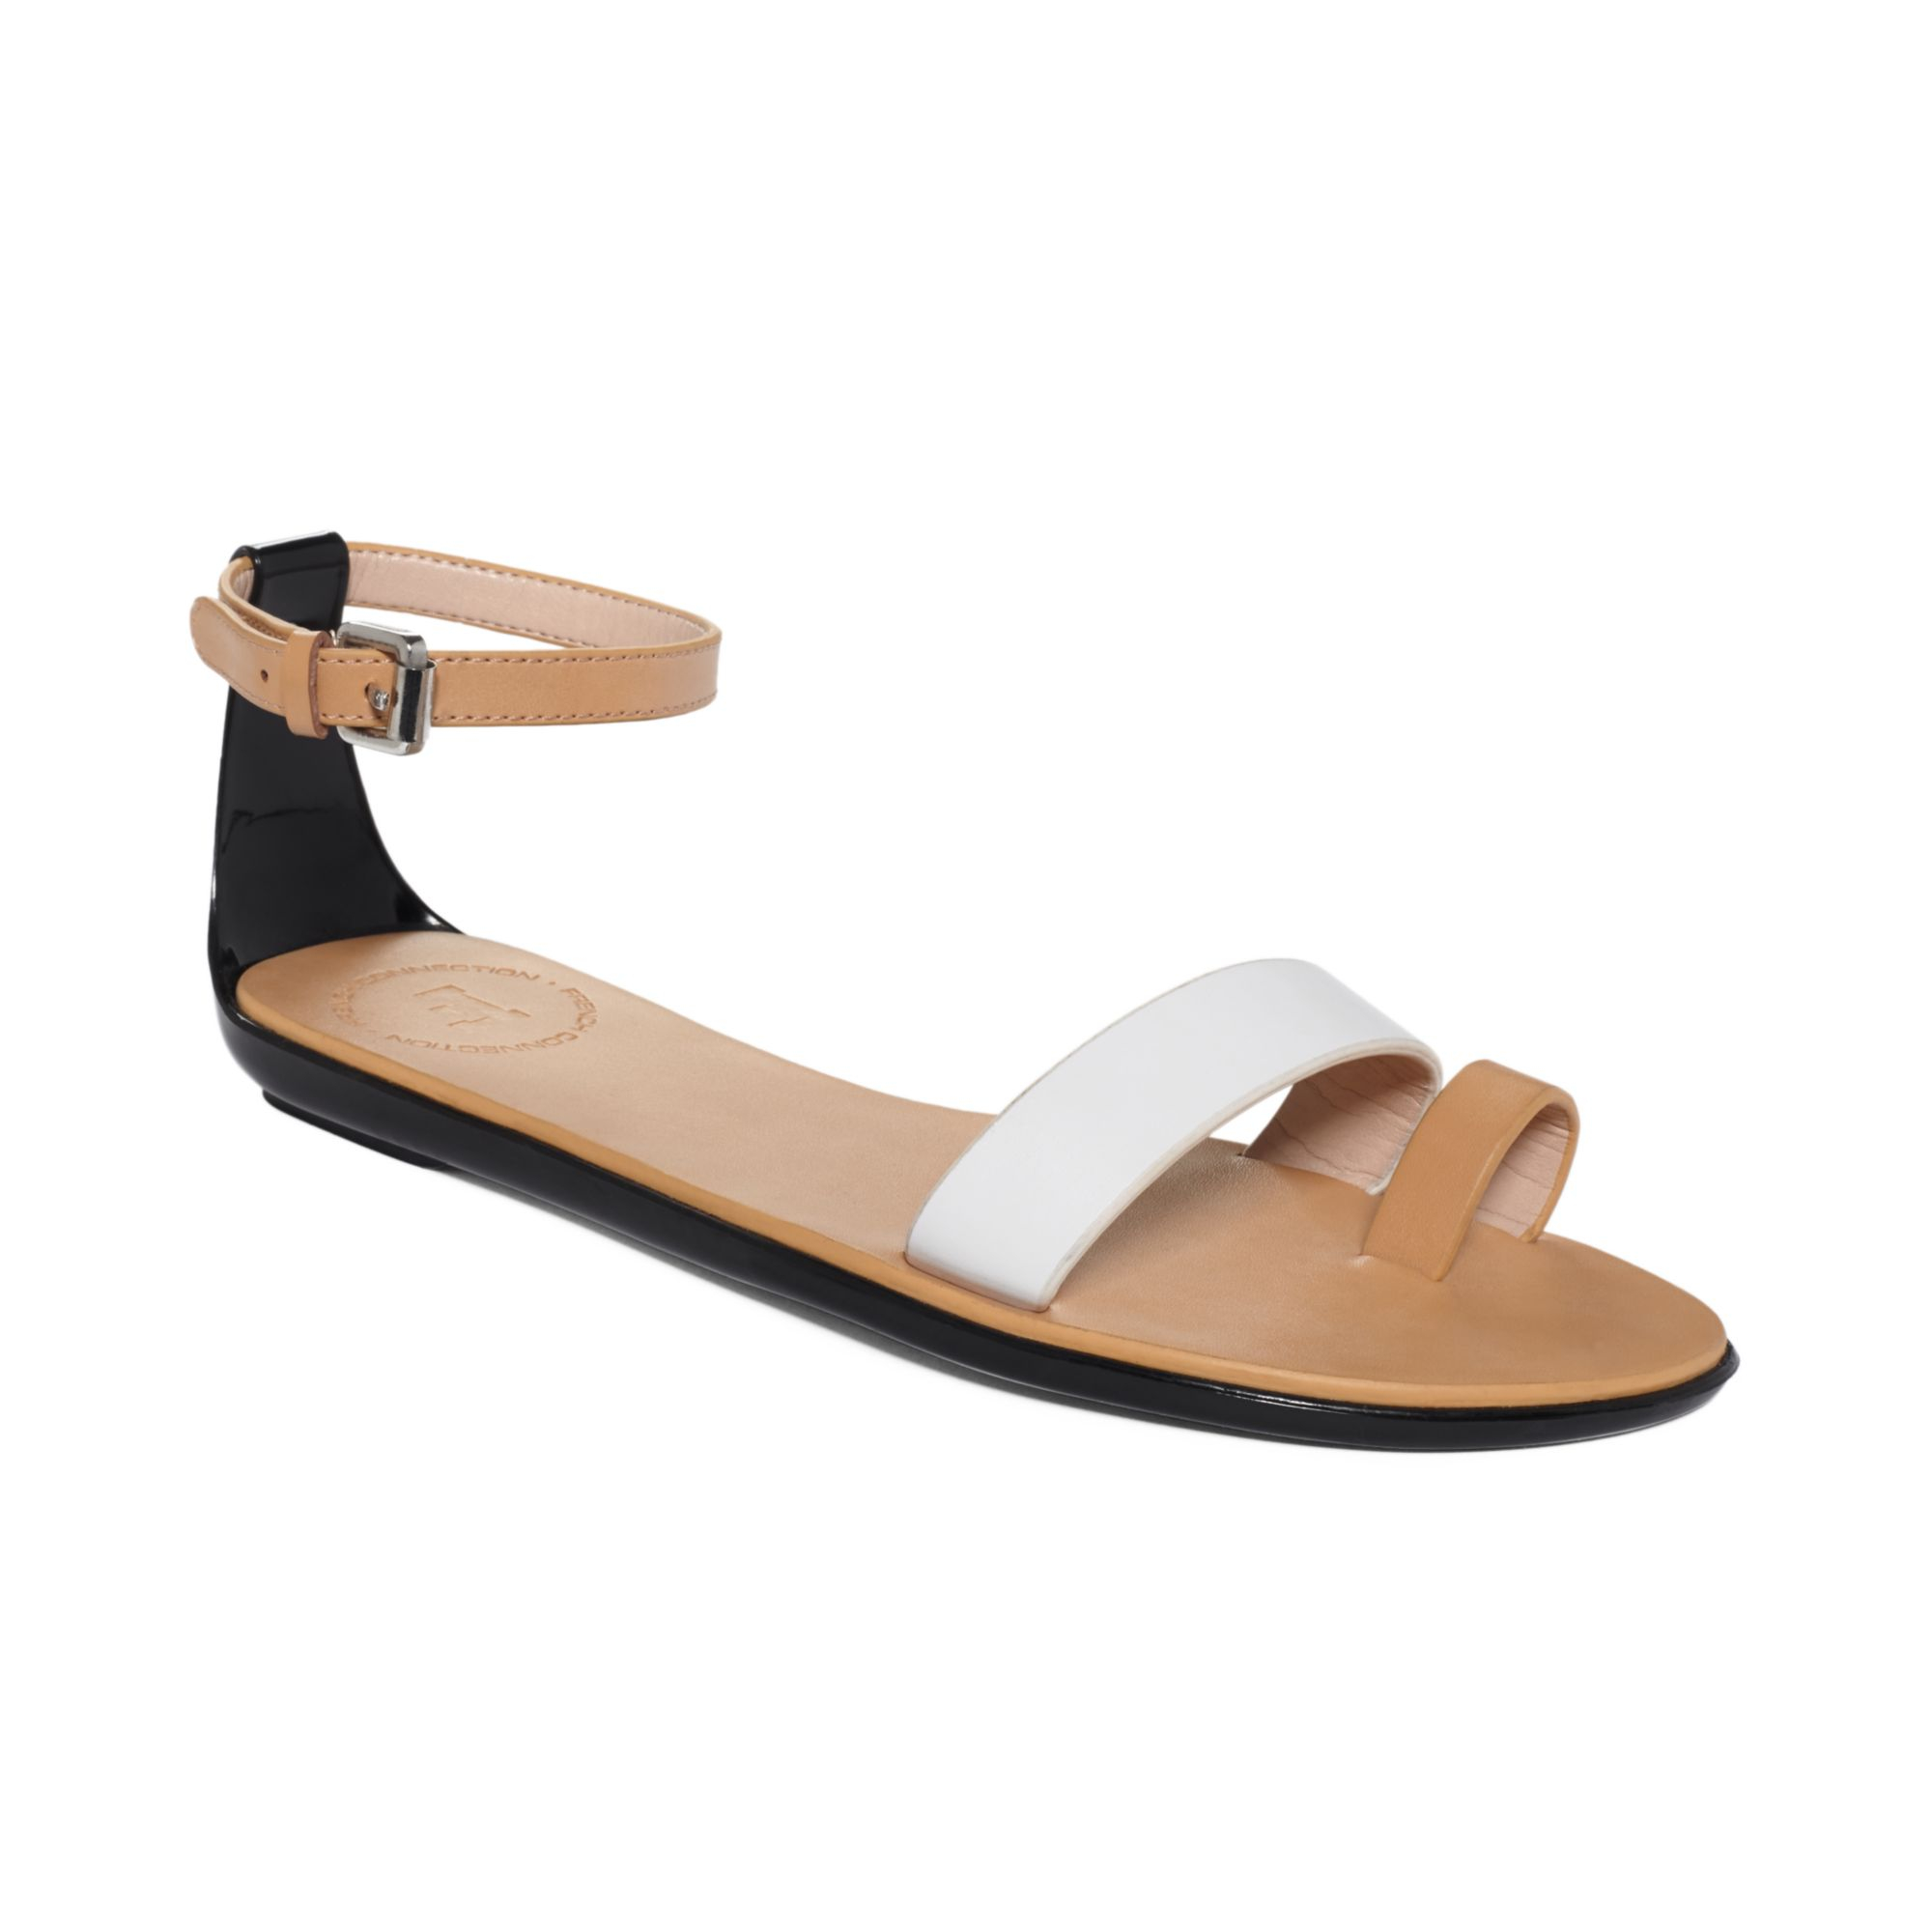 French Connection Terri Toe Ring Sandals in Beige (Black Tan) | Lyst